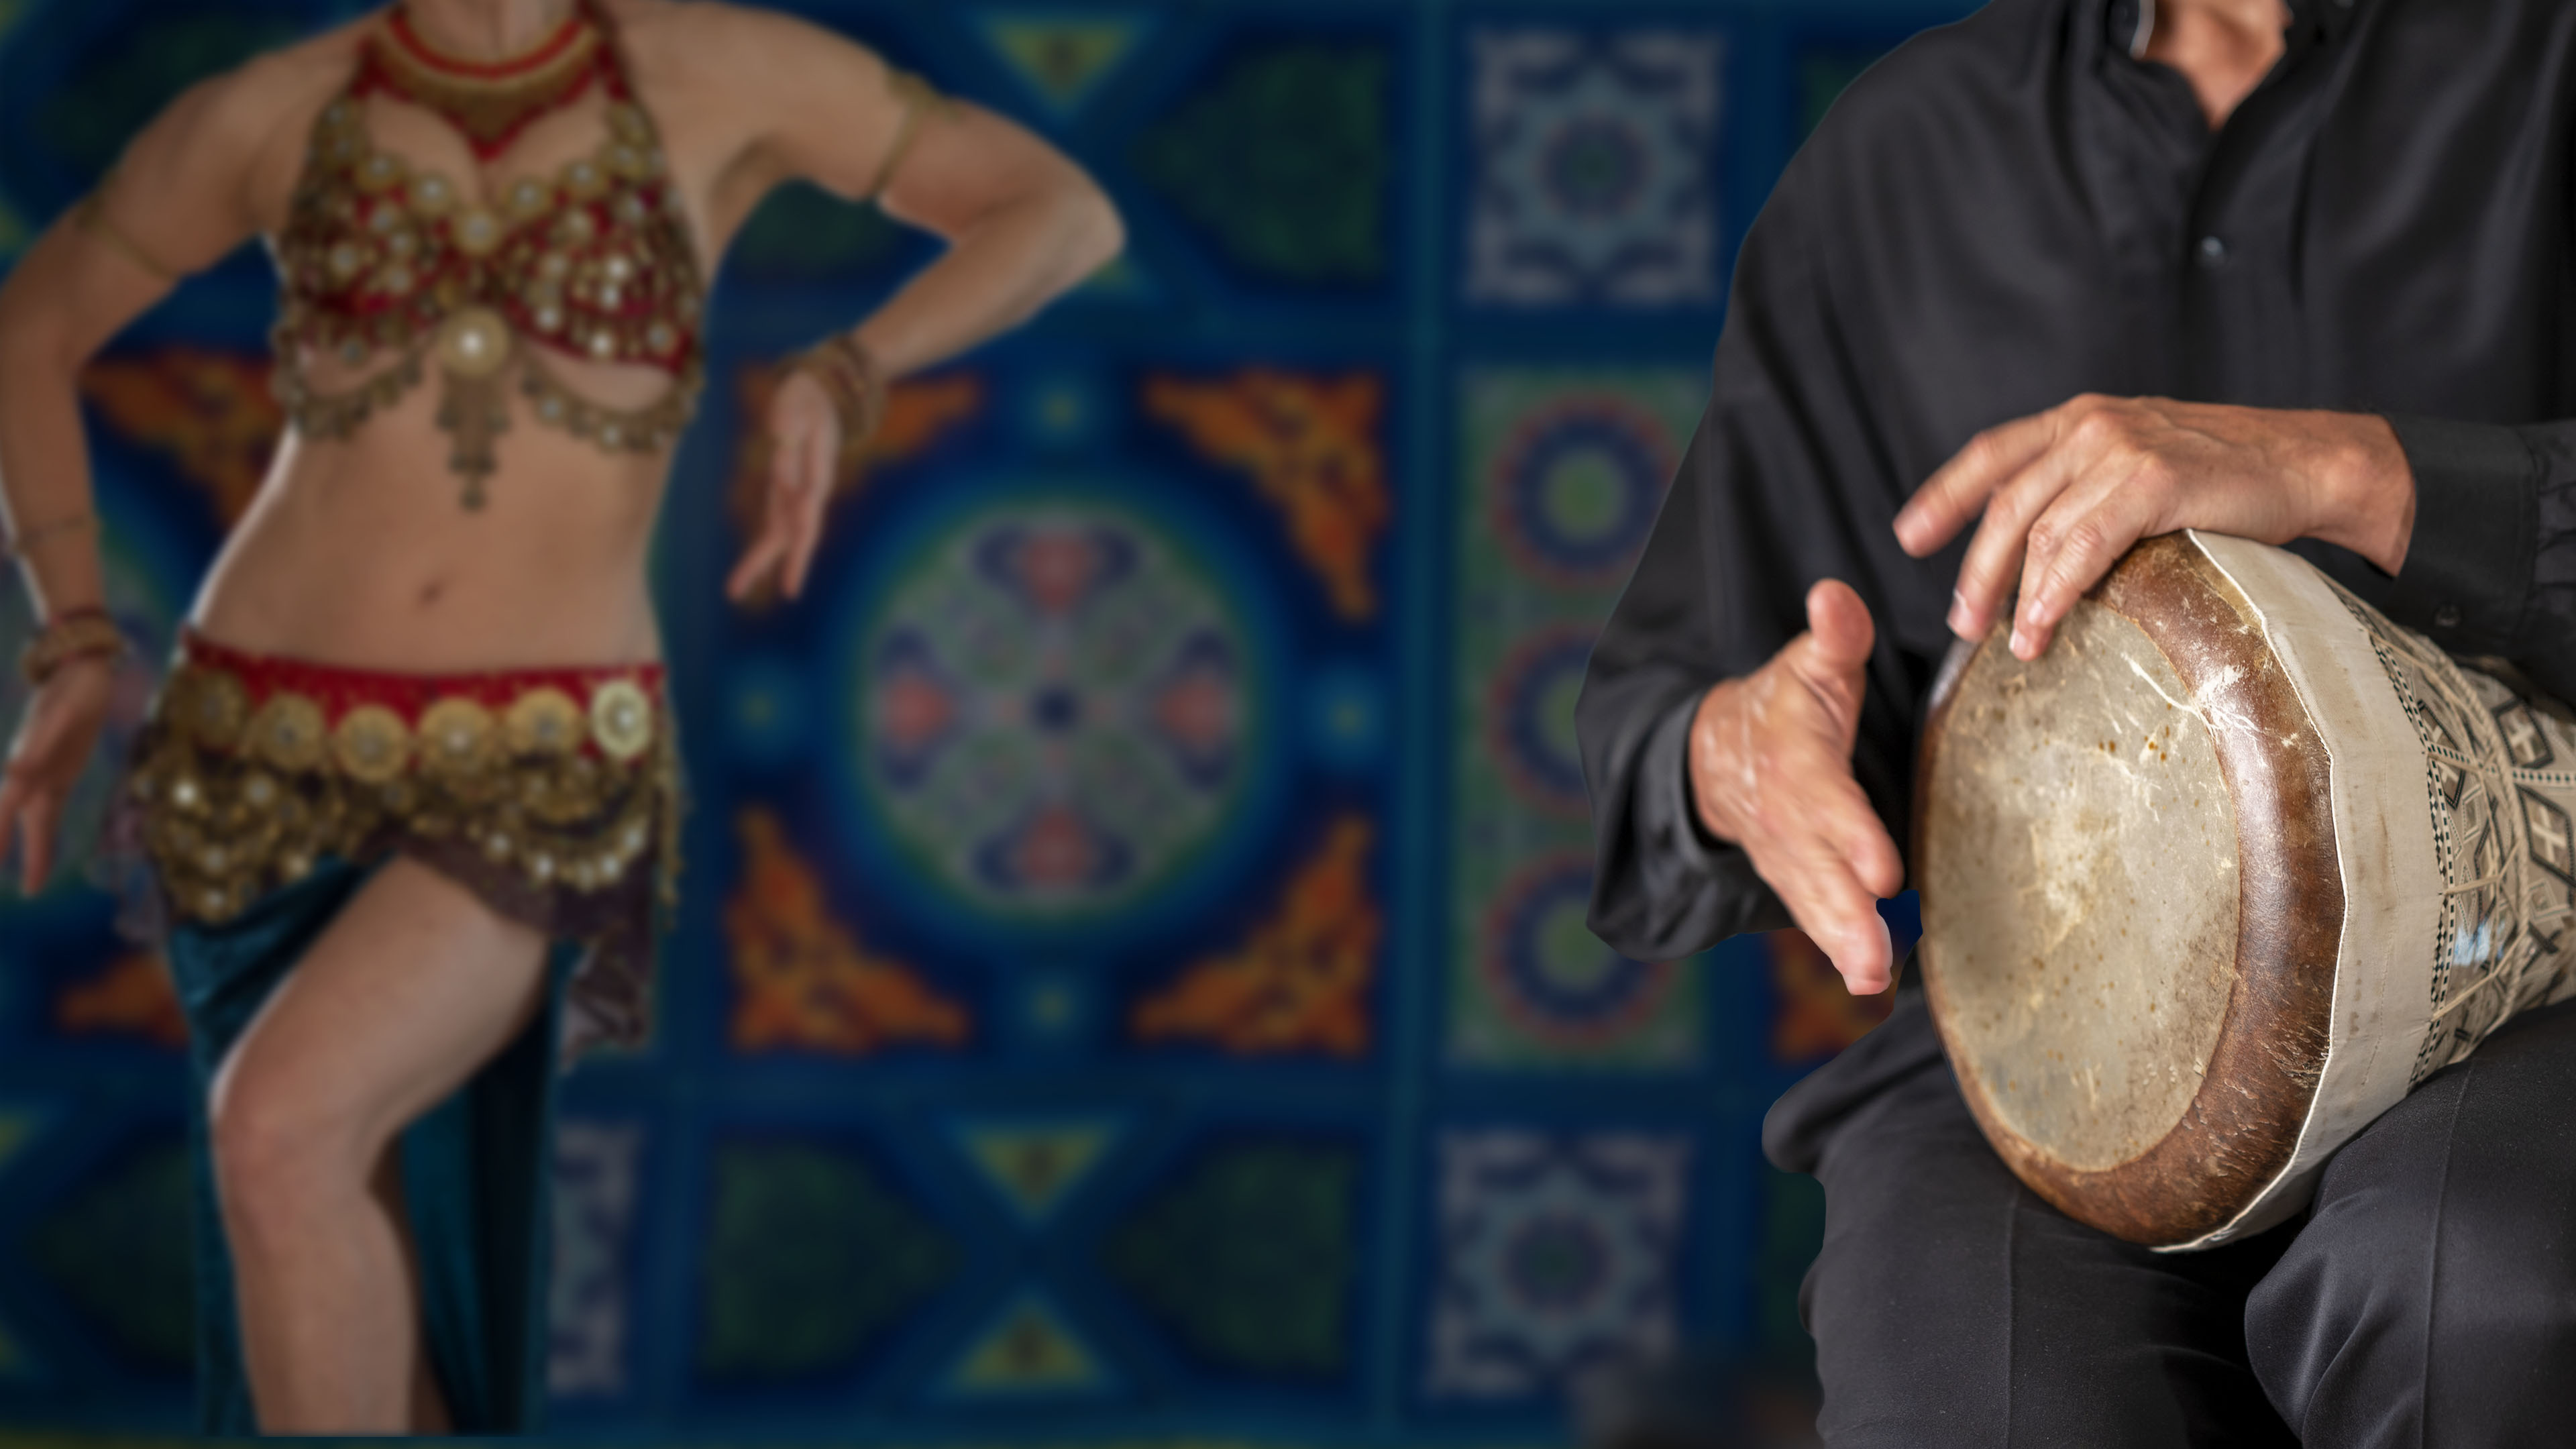 Cover photo of Jensuya and Bob for the Rhythm Practice for Belly Dance Beledi online course